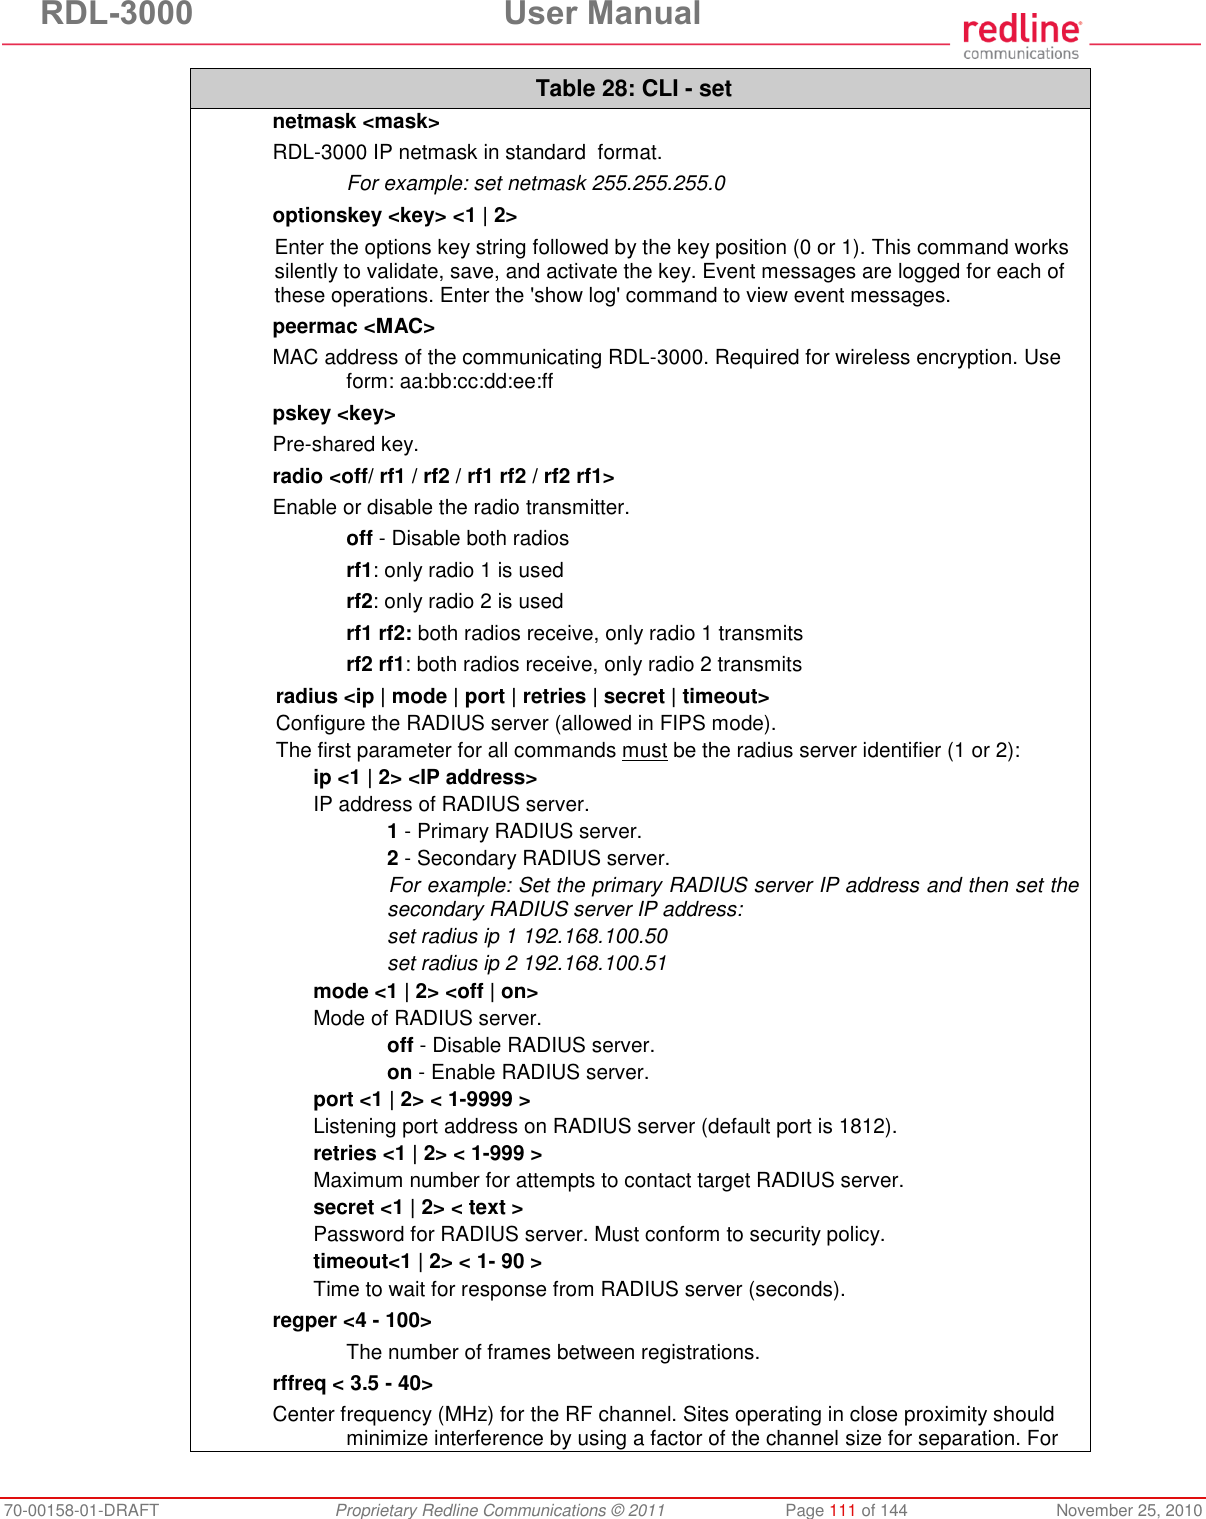 RDL-3000  User Manual 70-00158-01-DRAFT  Proprietary Redline Communications © 2011  Page 111 of 144  November 25, 2010 Table 28: CLI - set netmask &lt;mask&gt; RDL-3000 IP netmask in standard  format.   For example: set netmask 255.255.255.0 optionskey &lt;key&gt; &lt;1 | 2&gt; Enter the options key string followed by the key position (0 or 1). This command works silently to validate, save, and activate the key. Event messages are logged for each of these operations. Enter the &apos;show log&apos; command to view event messages. peermac &lt;MAC&gt; MAC address of the communicating RDL-3000. Required for wireless encryption. Use form: aa:bb:cc:dd:ee:ff pskey &lt;key&gt; Pre-shared key. radio &lt;off/ rf1 / rf2 / rf1 rf2 / rf2 rf1&gt; Enable or disable the radio transmitter.  off - Disable both radios  rf1: only radio 1 is used  rf2: only radio 2 is used  rf1 rf2: both radios receive, only radio 1 transmits  rf2 rf1: both radios receive, only radio 2 transmits radius &lt;ip | mode | port | retries | secret | timeout&gt; Configure the RADIUS server (allowed in FIPS mode). The first parameter for all commands must be the radius server identifier (1 or 2):  ip &lt;1 | 2&gt; &lt;IP address&gt; IP address of RADIUS server.   1 - Primary RADIUS server.   2 - Secondary RADIUS server. For example: Set the primary RADIUS server IP address and then set the secondary RADIUS server IP address:  set radius ip 1 192.168.100.50  set radius ip 2 192.168.100.51 mode &lt;1 | 2&gt; &lt;off | on&gt; Mode of RADIUS server.   off - Disable RADIUS server.  on - Enable RADIUS server. port &lt;1 | 2&gt; &lt; 1-9999 &gt; Listening port address on RADIUS server (default port is 1812). retries &lt;1 | 2&gt; &lt; 1-999 &gt; Maximum number for attempts to contact target RADIUS server. secret &lt;1 | 2&gt; &lt; text &gt; Password for RADIUS server. Must conform to security policy. timeout&lt;1 | 2&gt; &lt; 1- 90 &gt; Time to wait for response from RADIUS server (seconds). regper &lt;4 - 100&gt;  The number of frames between registrations. rffreq &lt; 3.5 - 40&gt; Center frequency (MHz) for the RF channel. Sites operating in close proximity should minimize interference by using a factor of the channel size for separation. For 